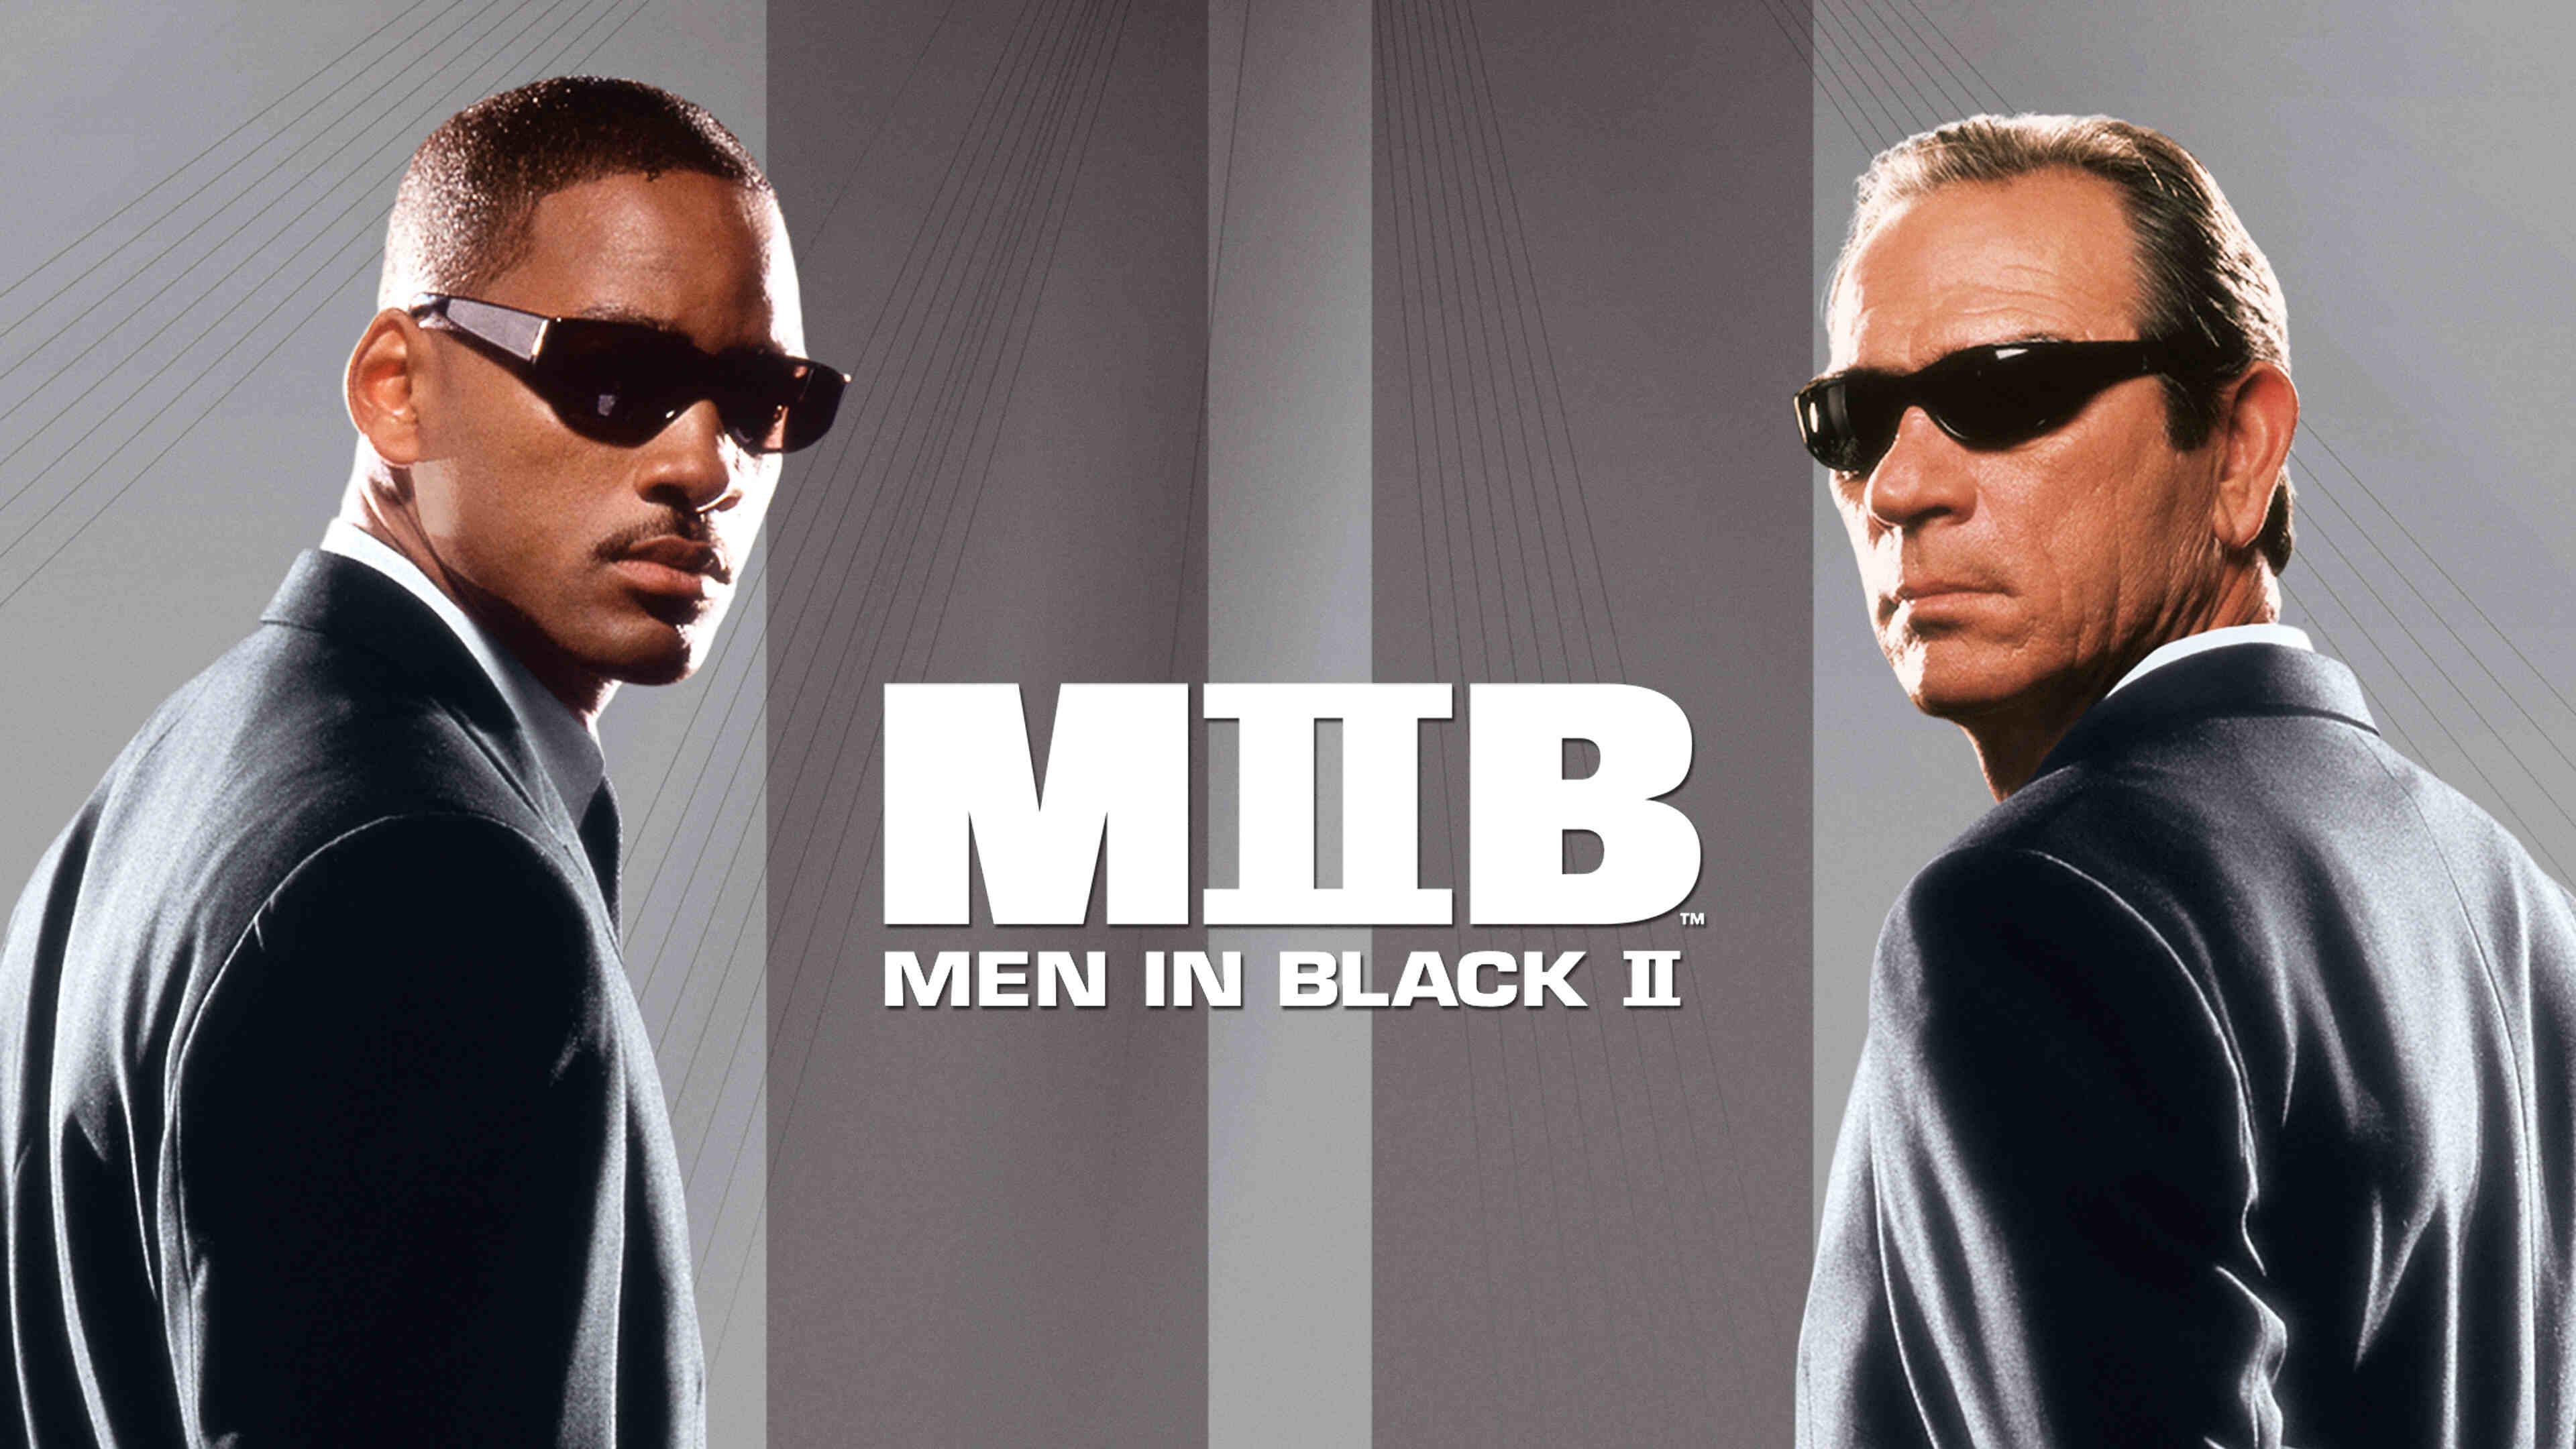 47-facts-about-the-movie-men-in-black-ii